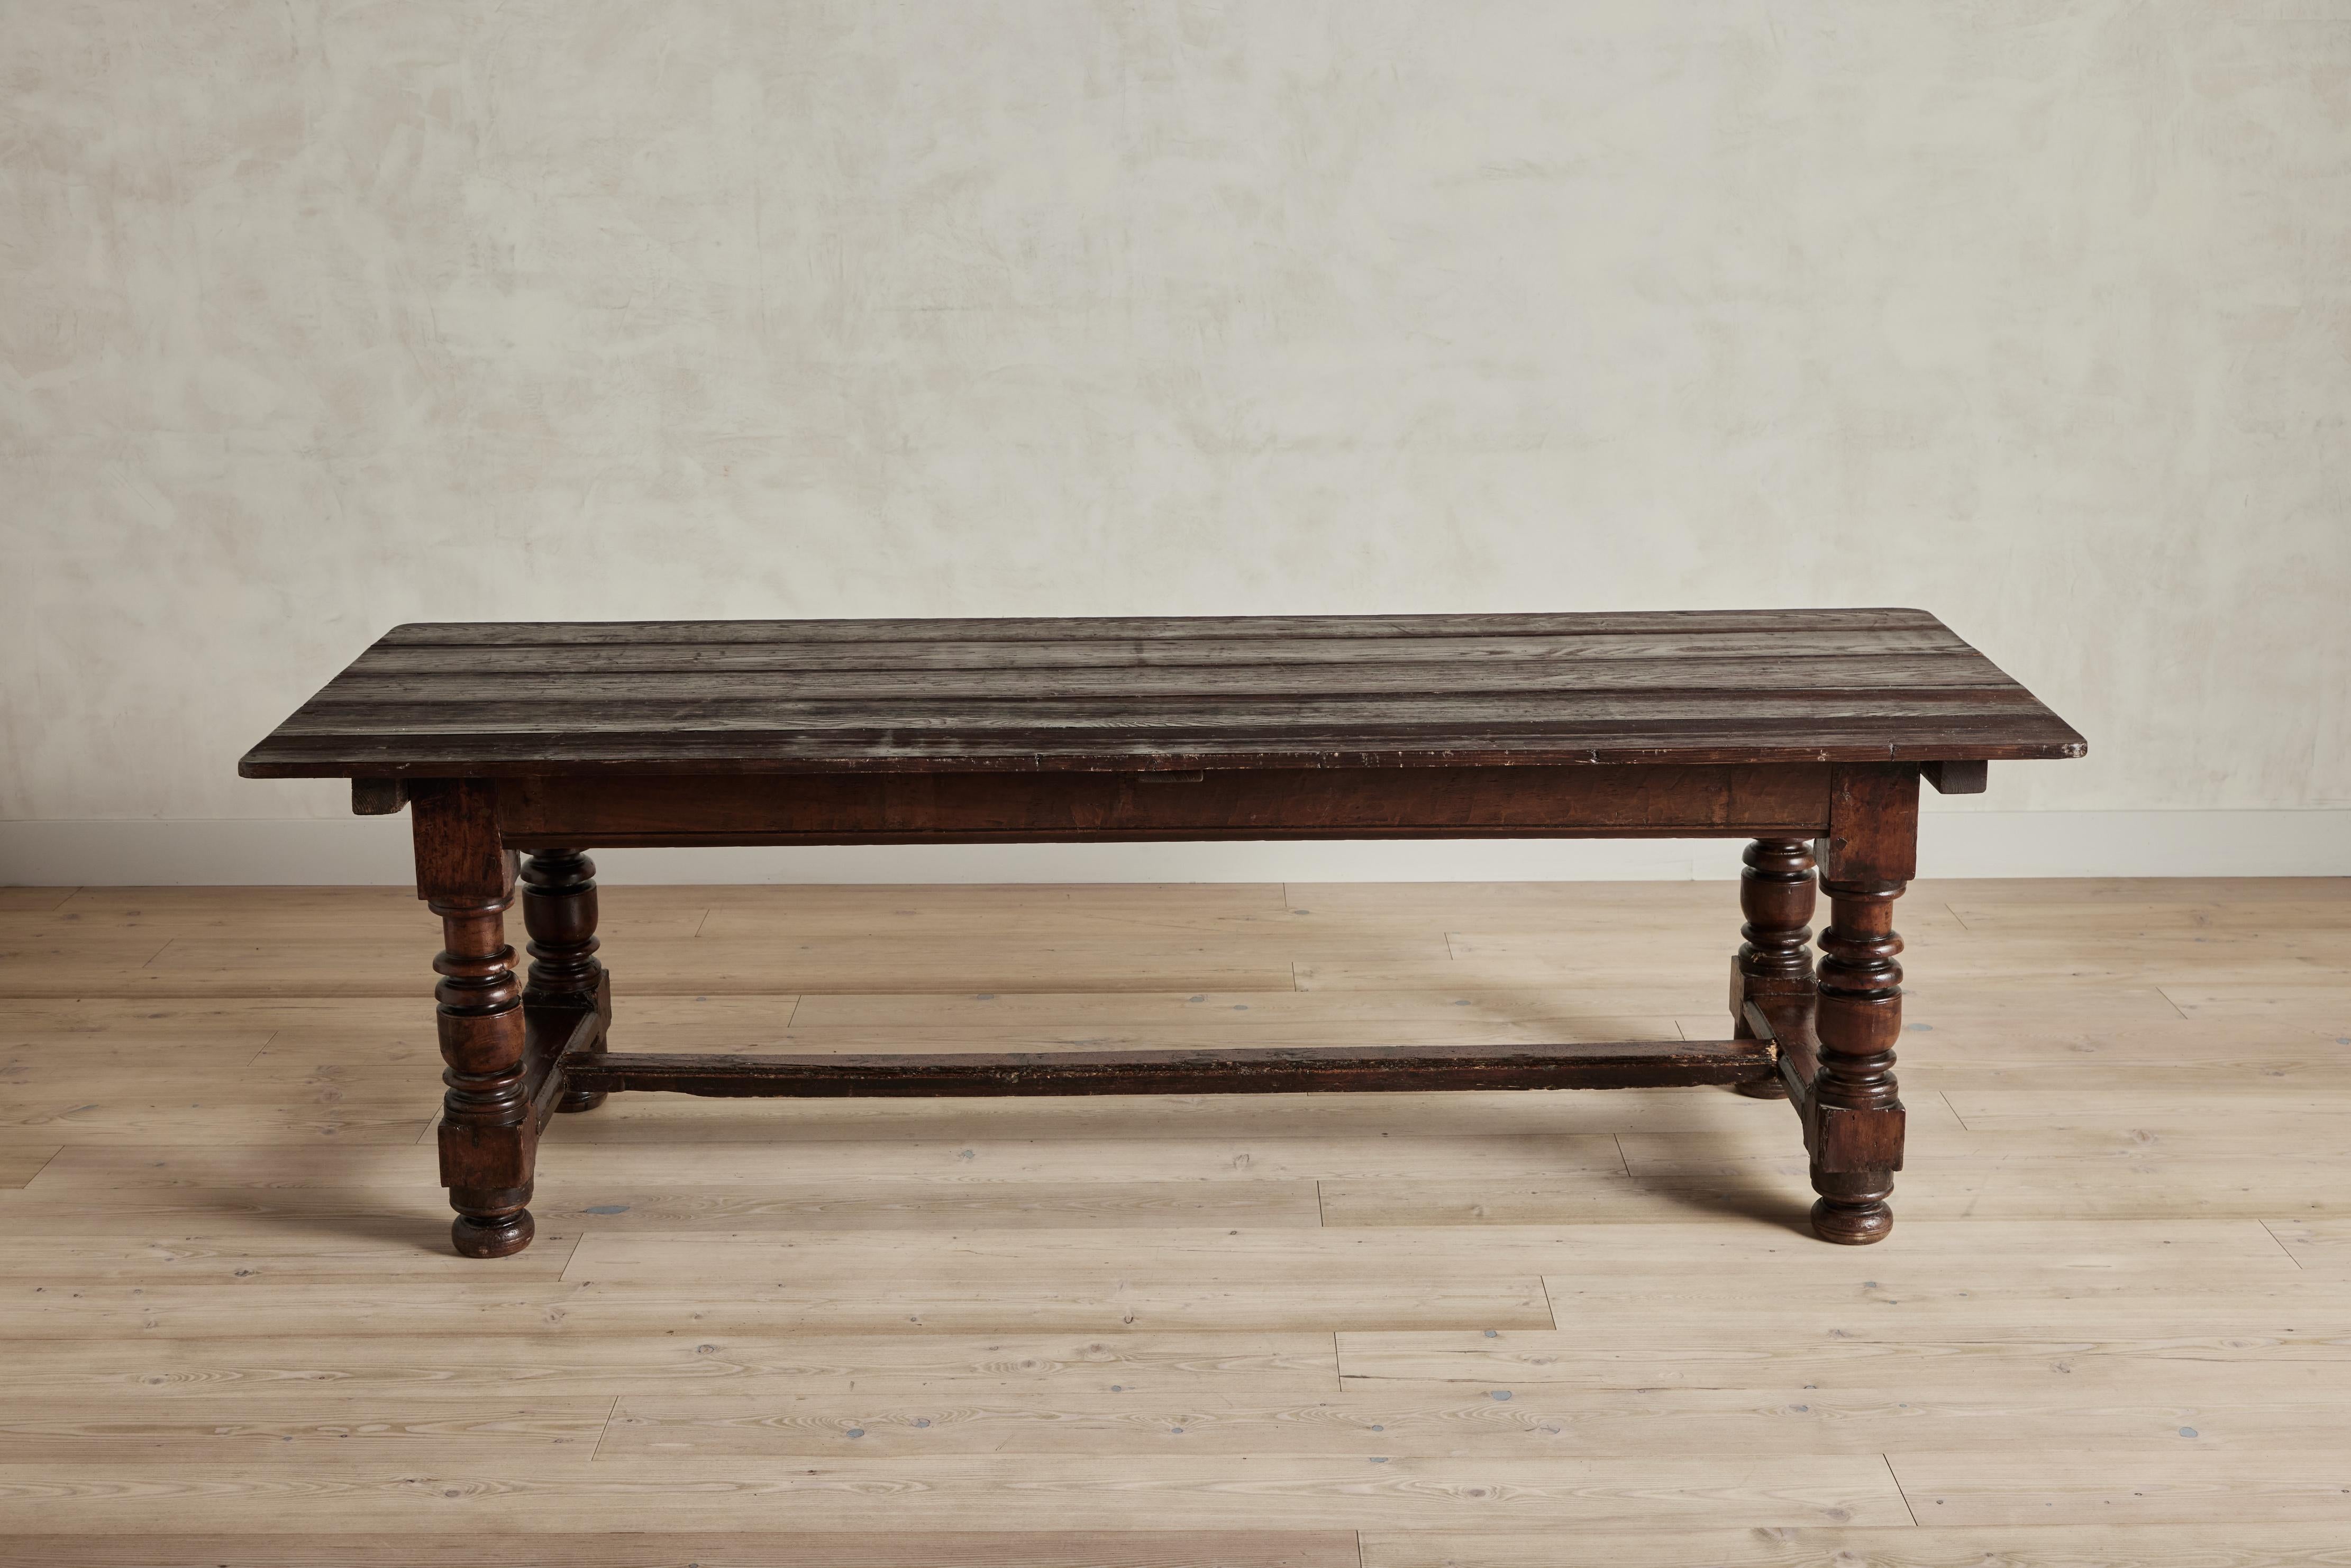 19th century refectory dining table with ornate turned wood legs in a dark wood finish. Good vintage condition with some visible wear on wood and finish that is consistent with age and use.